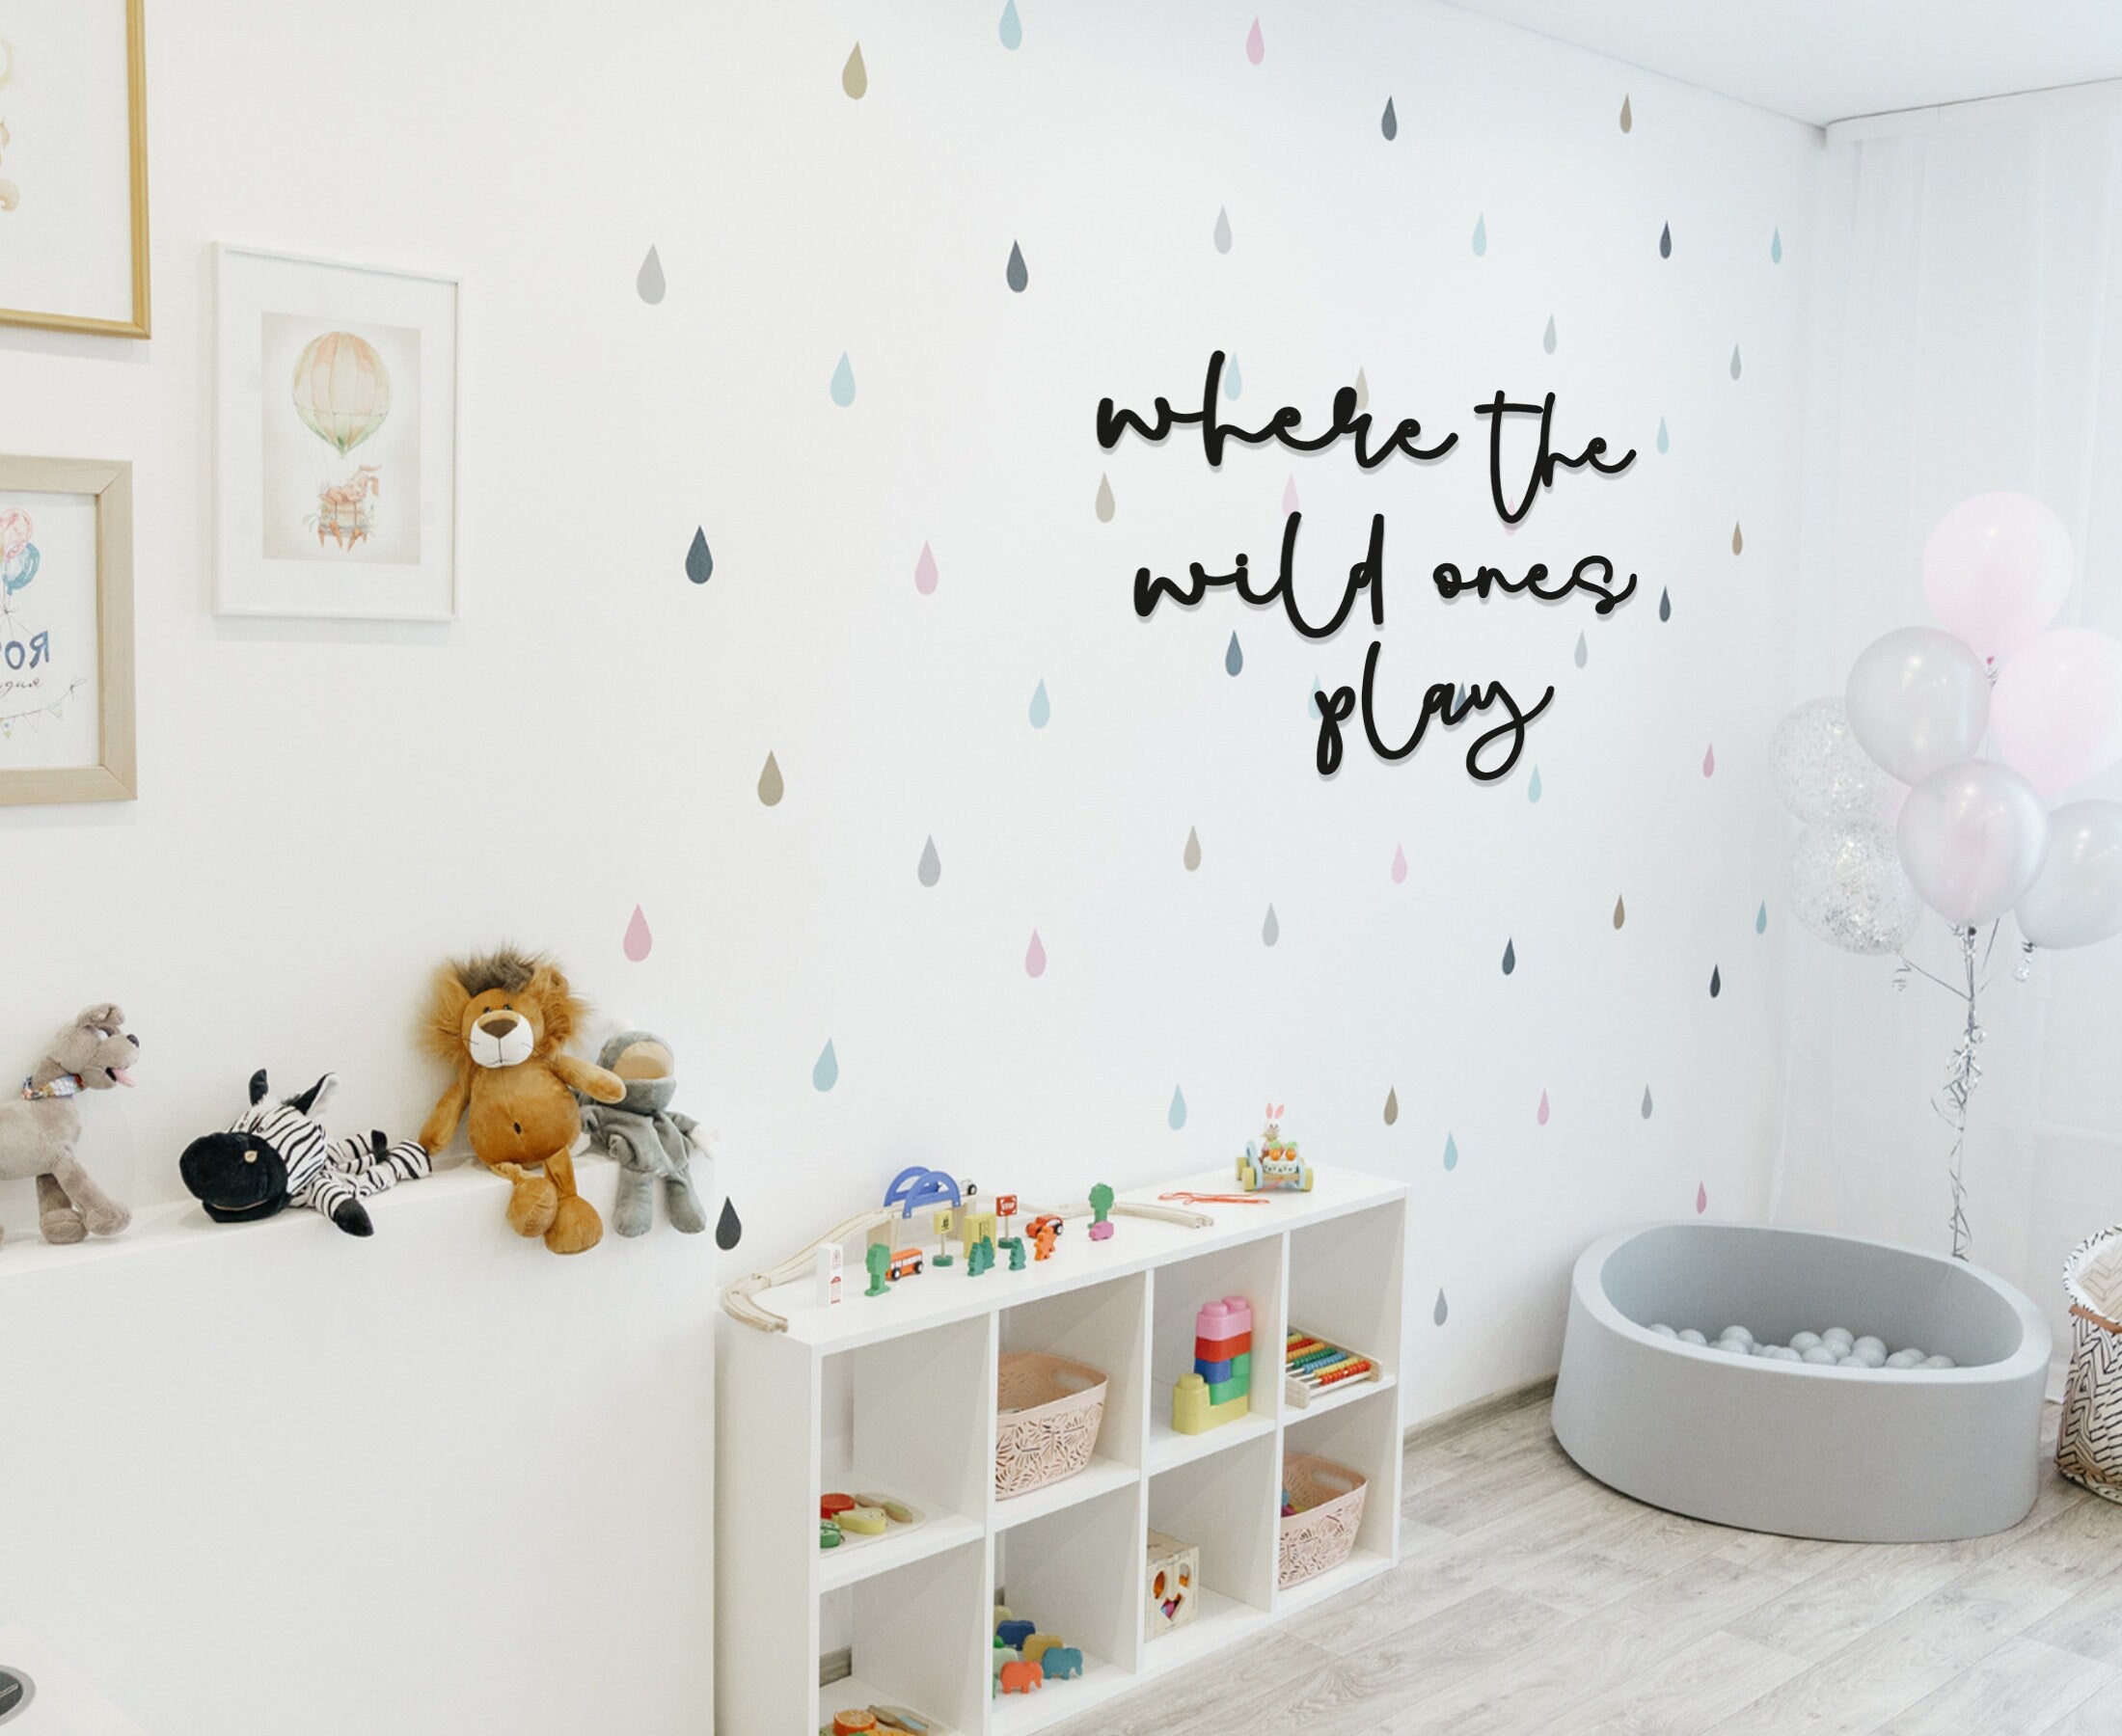 Where The Wild Ones Play - Nursery Wall Art - Childrens Bedroom - Wooden Word Text Art - Bedroom Art Gift - Sqaure Font 5